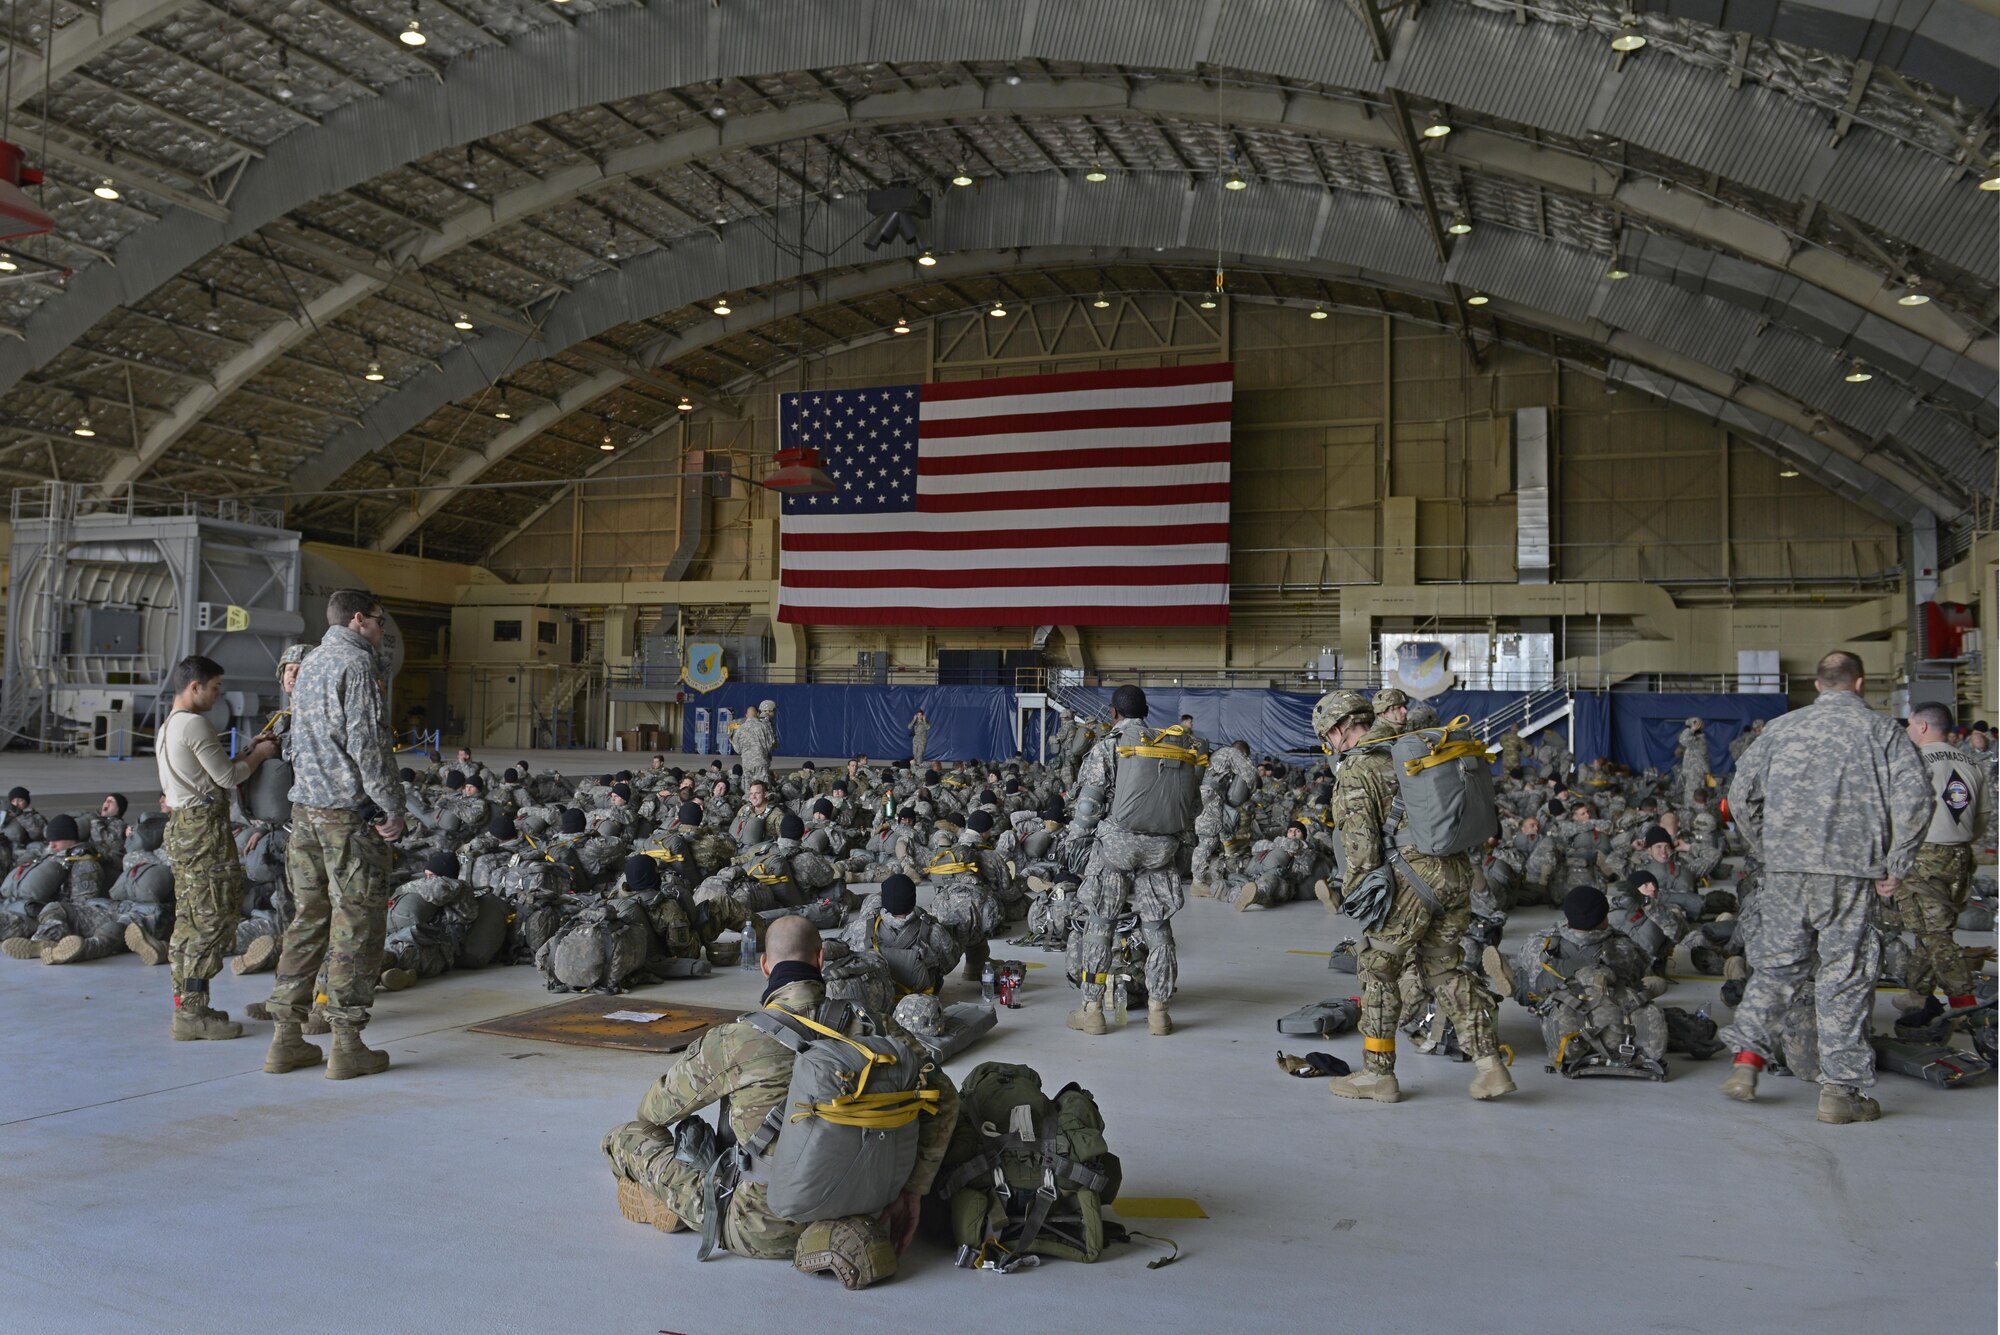 Paratroopers with the 4th Infantry Brigade Combat Team (Airborne), 25th Infantry Division, U.S. Army Alaska, and Tactical Air Control Party Airmen with the 3rd Air Support Operations Squadron, gather at Hangar 1 before a jump at Joint Base Elmendorf-Richardson, Alaska, Oct. 19, 2016. The jump was part of Red Flag-Alaska 17-1, a training exercise for U.S. and international forces flown under simulated air combat conditions. 